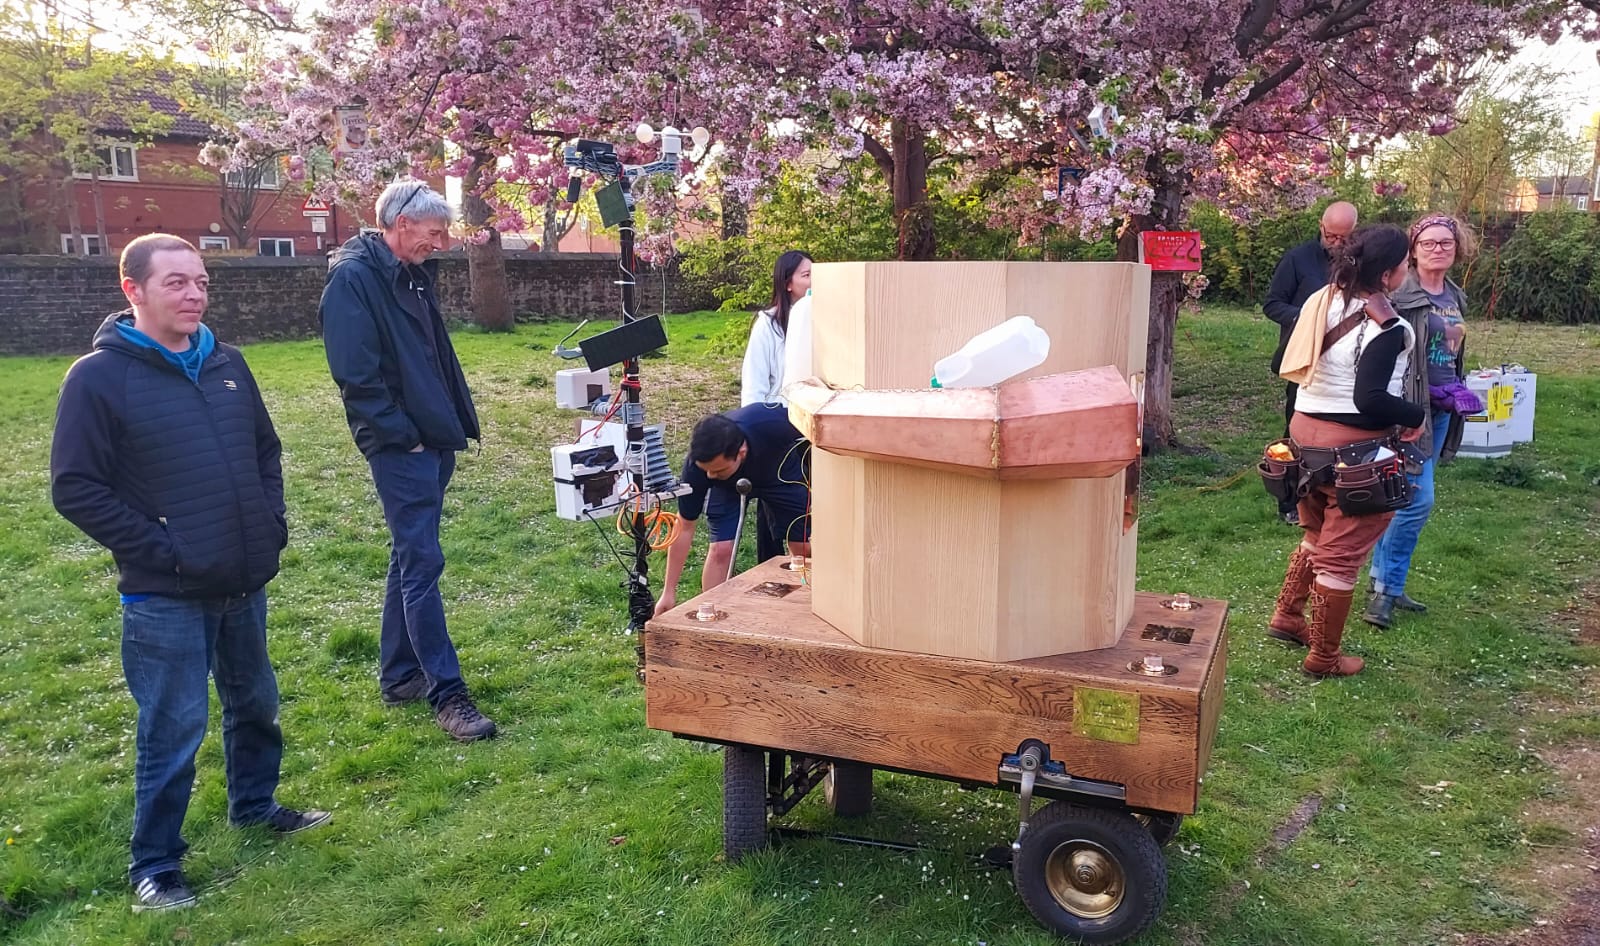 Future Machine with people standing around, blossom trees in the back ground